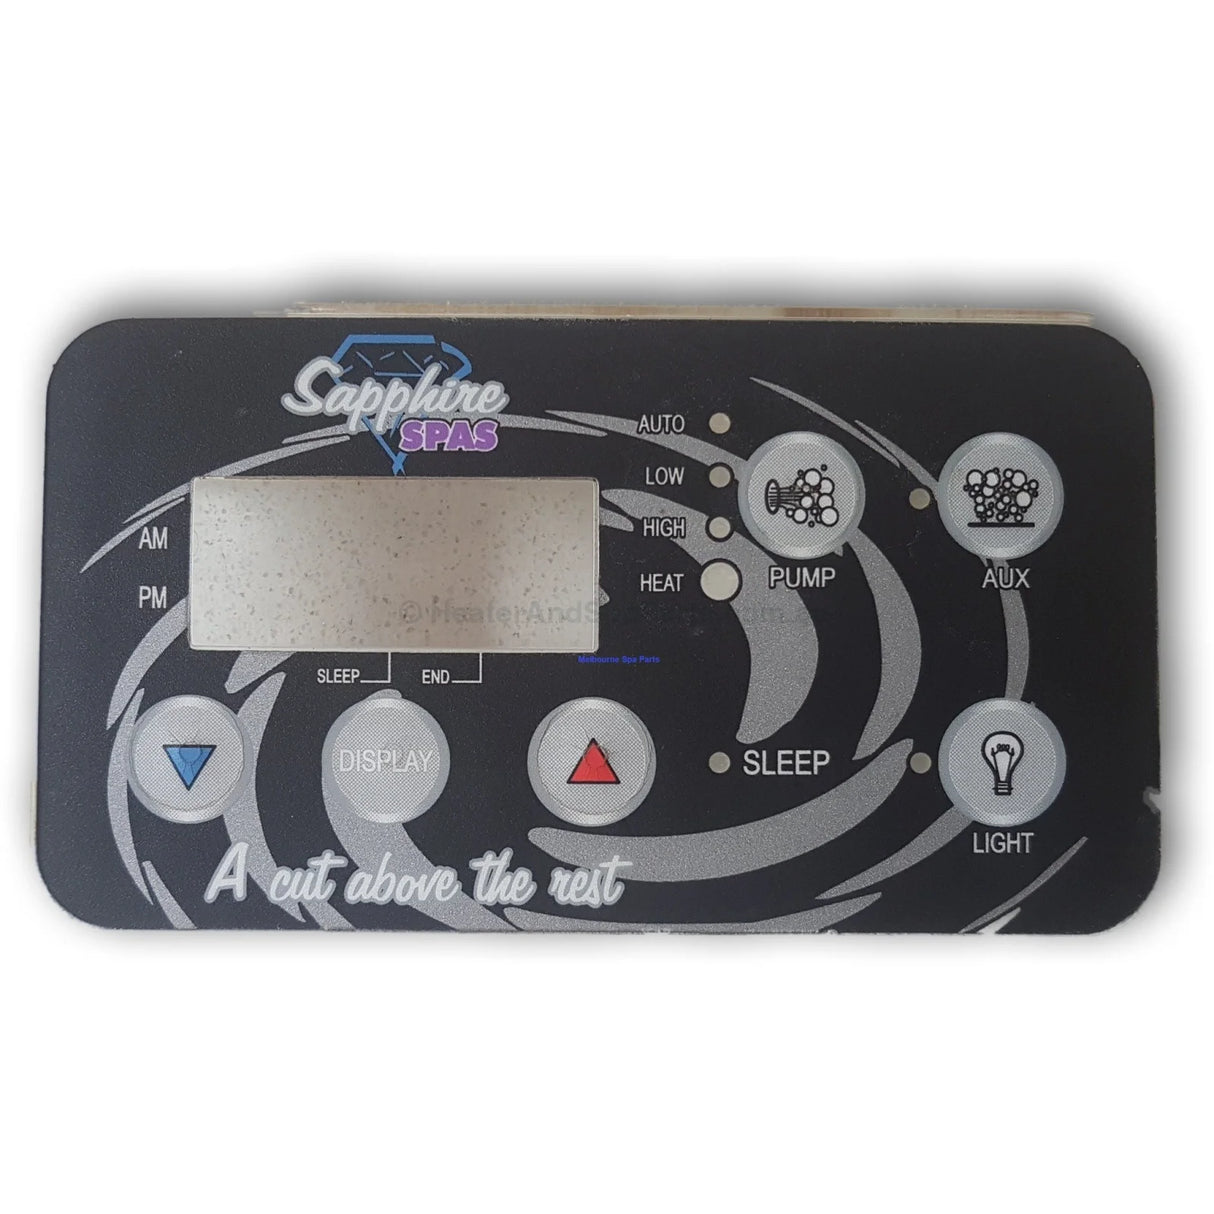 Spaquip Spa Power 750 SP750 Touchpad Control Panel Keypad - Heater and Spa Parts